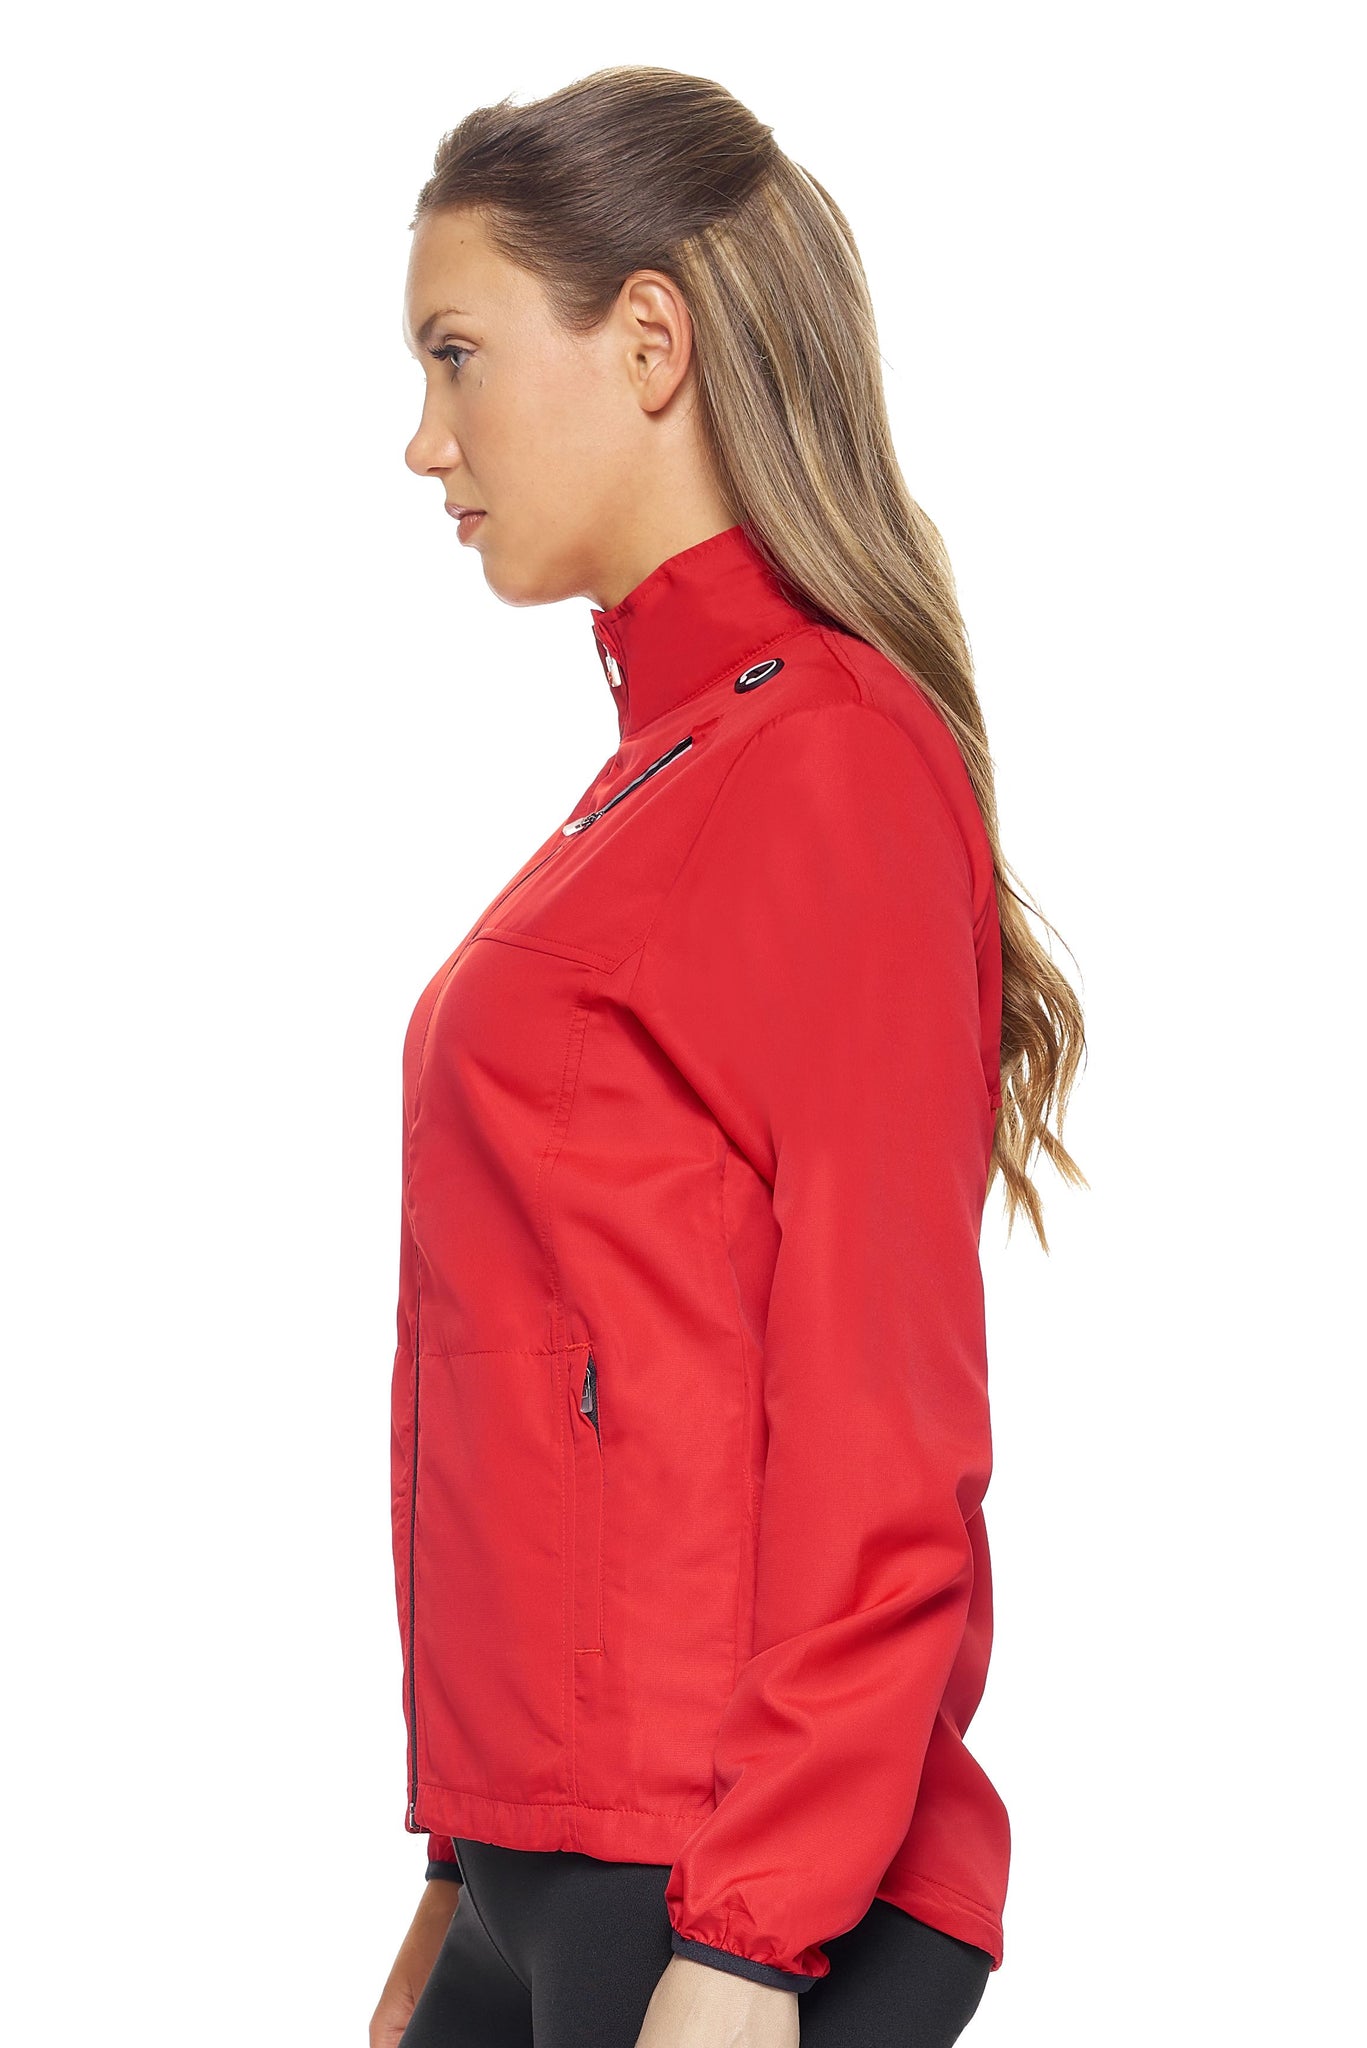 Expert Brand Wholesale Women's Water Resistant Run Away Jacket in red image 3#red